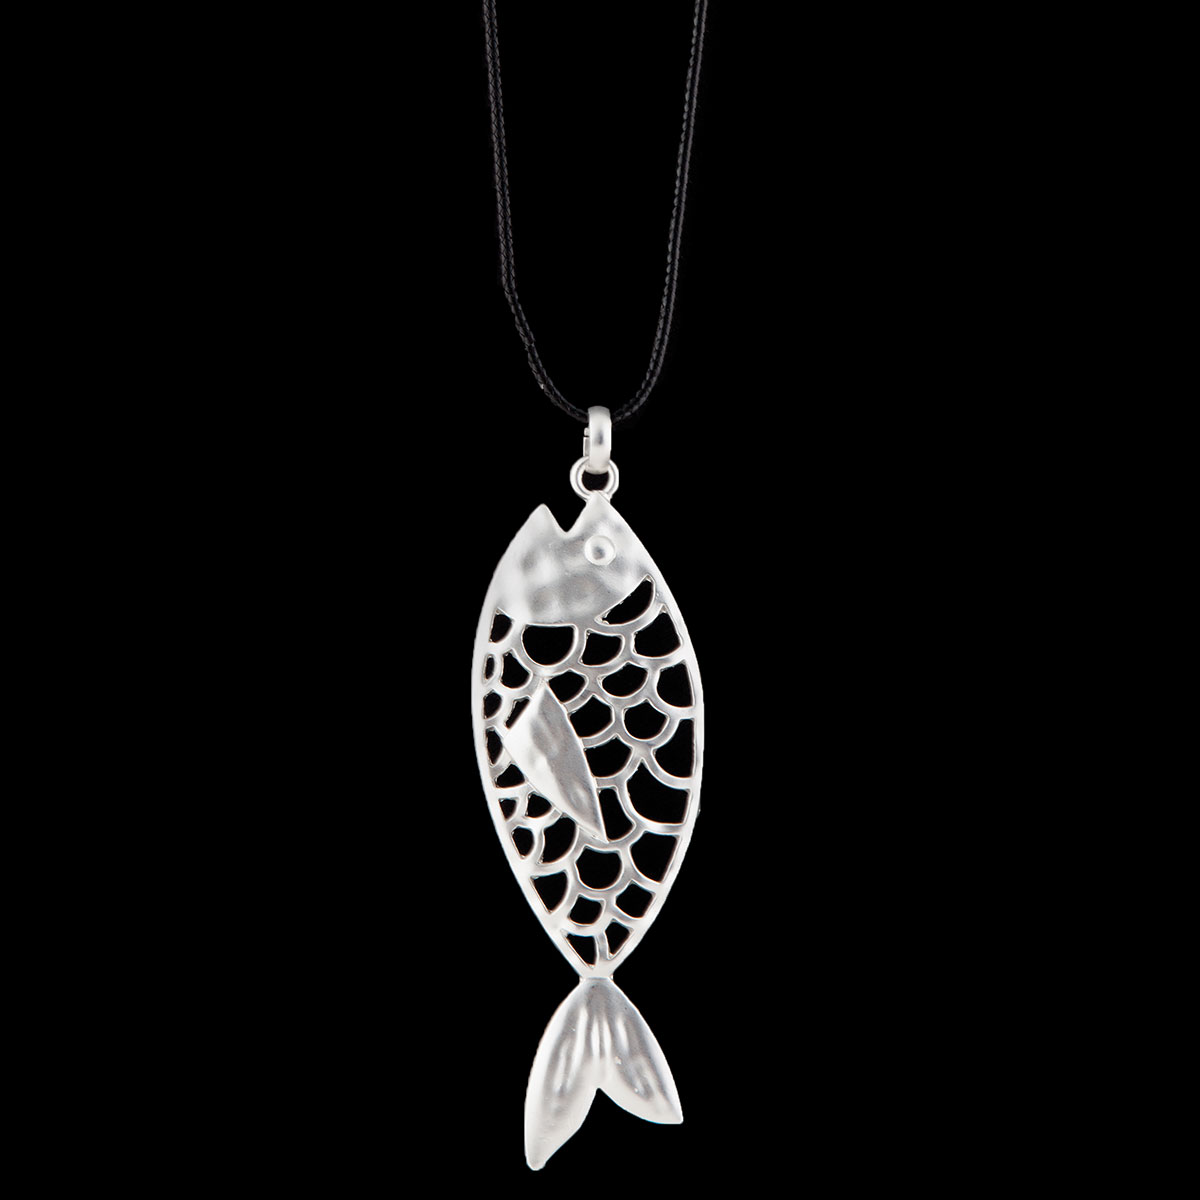 b50 NECKLACE FISH ON CORD 1.25IN X 3.75IN ; 30IN - 32IN - Click Image to Close